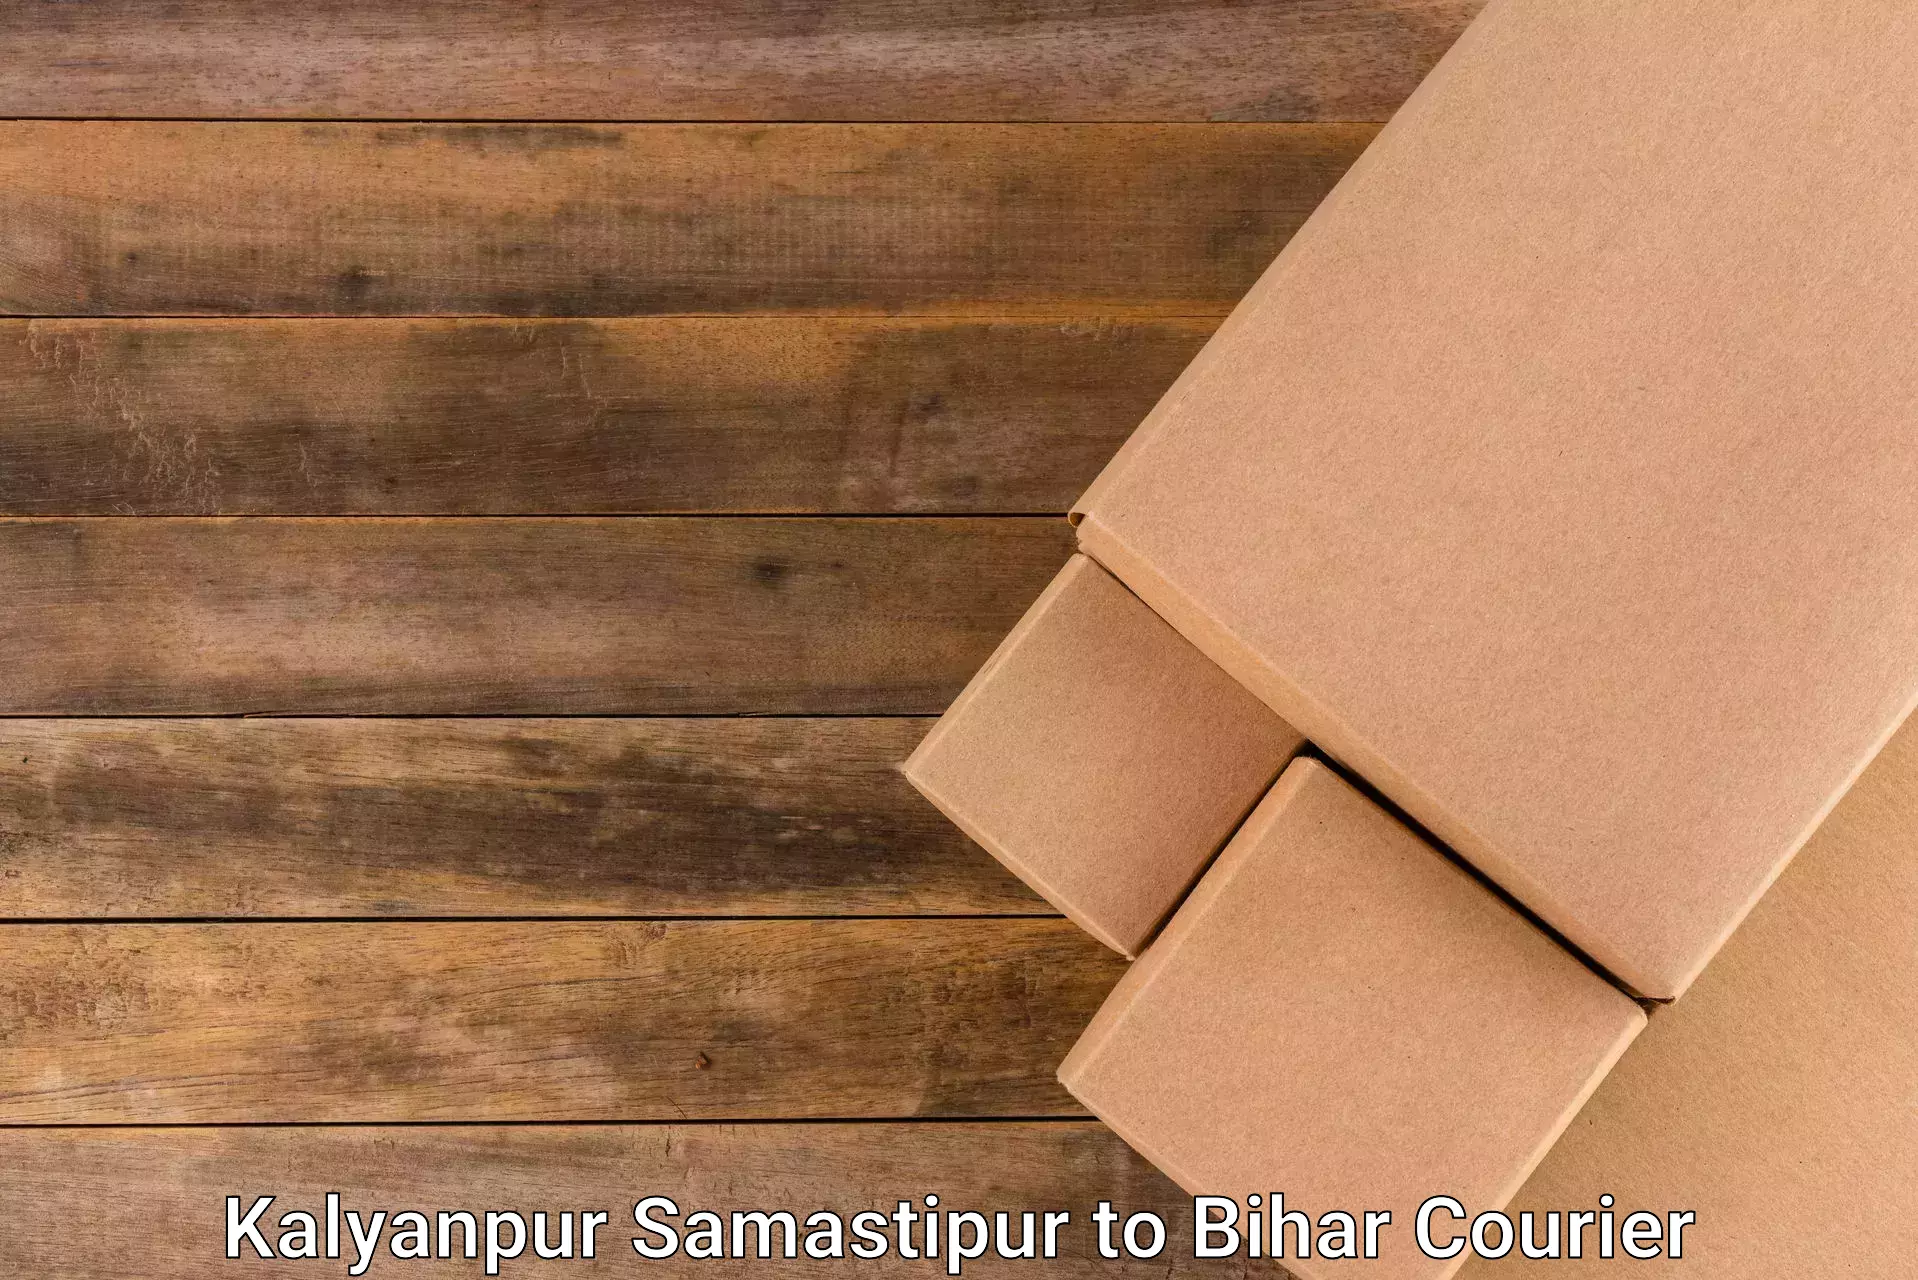 Reliable courier service Kalyanpur Samastipur to Amarpur Banka